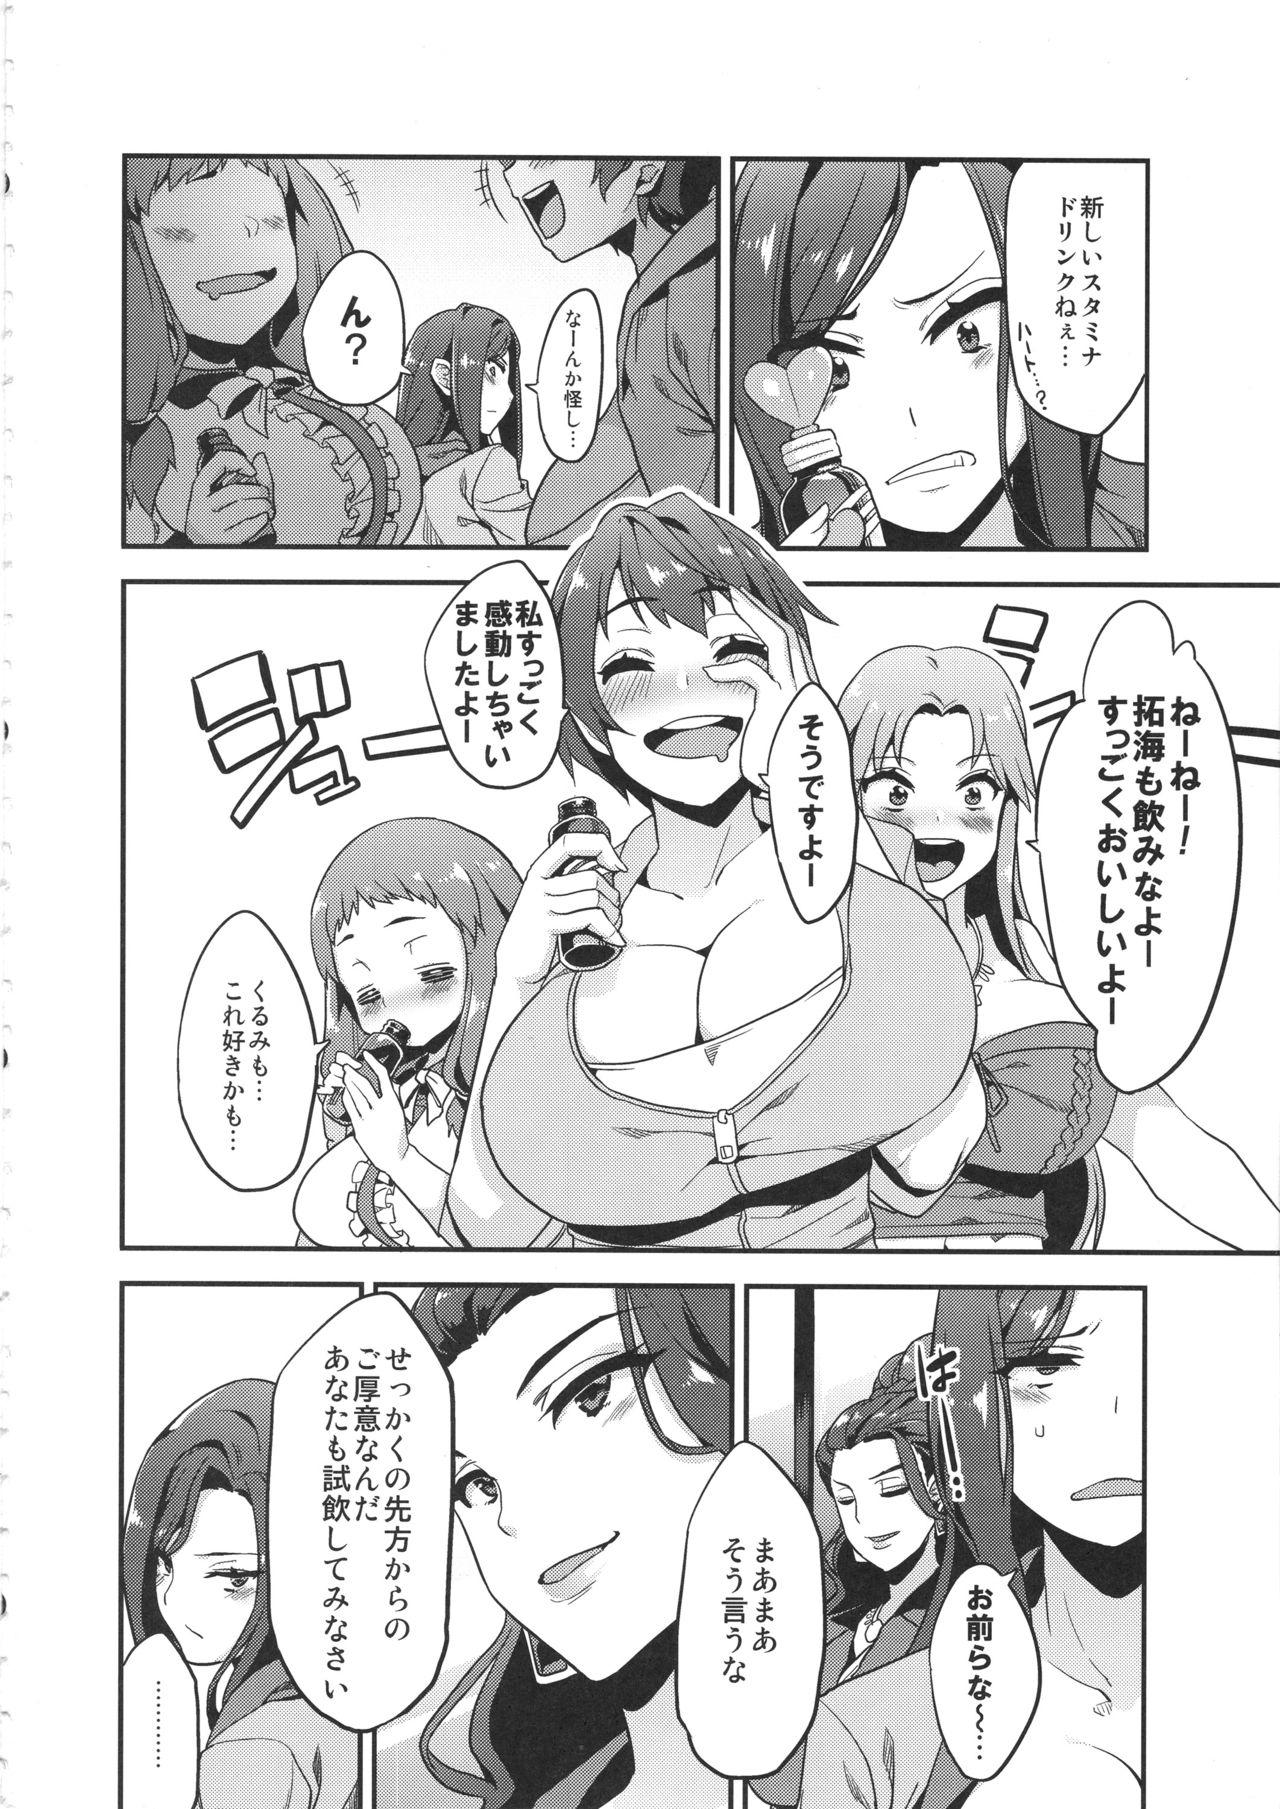 Longhair Hentai Idol Recycle - The idolmaster Stepdaughter - Page 3